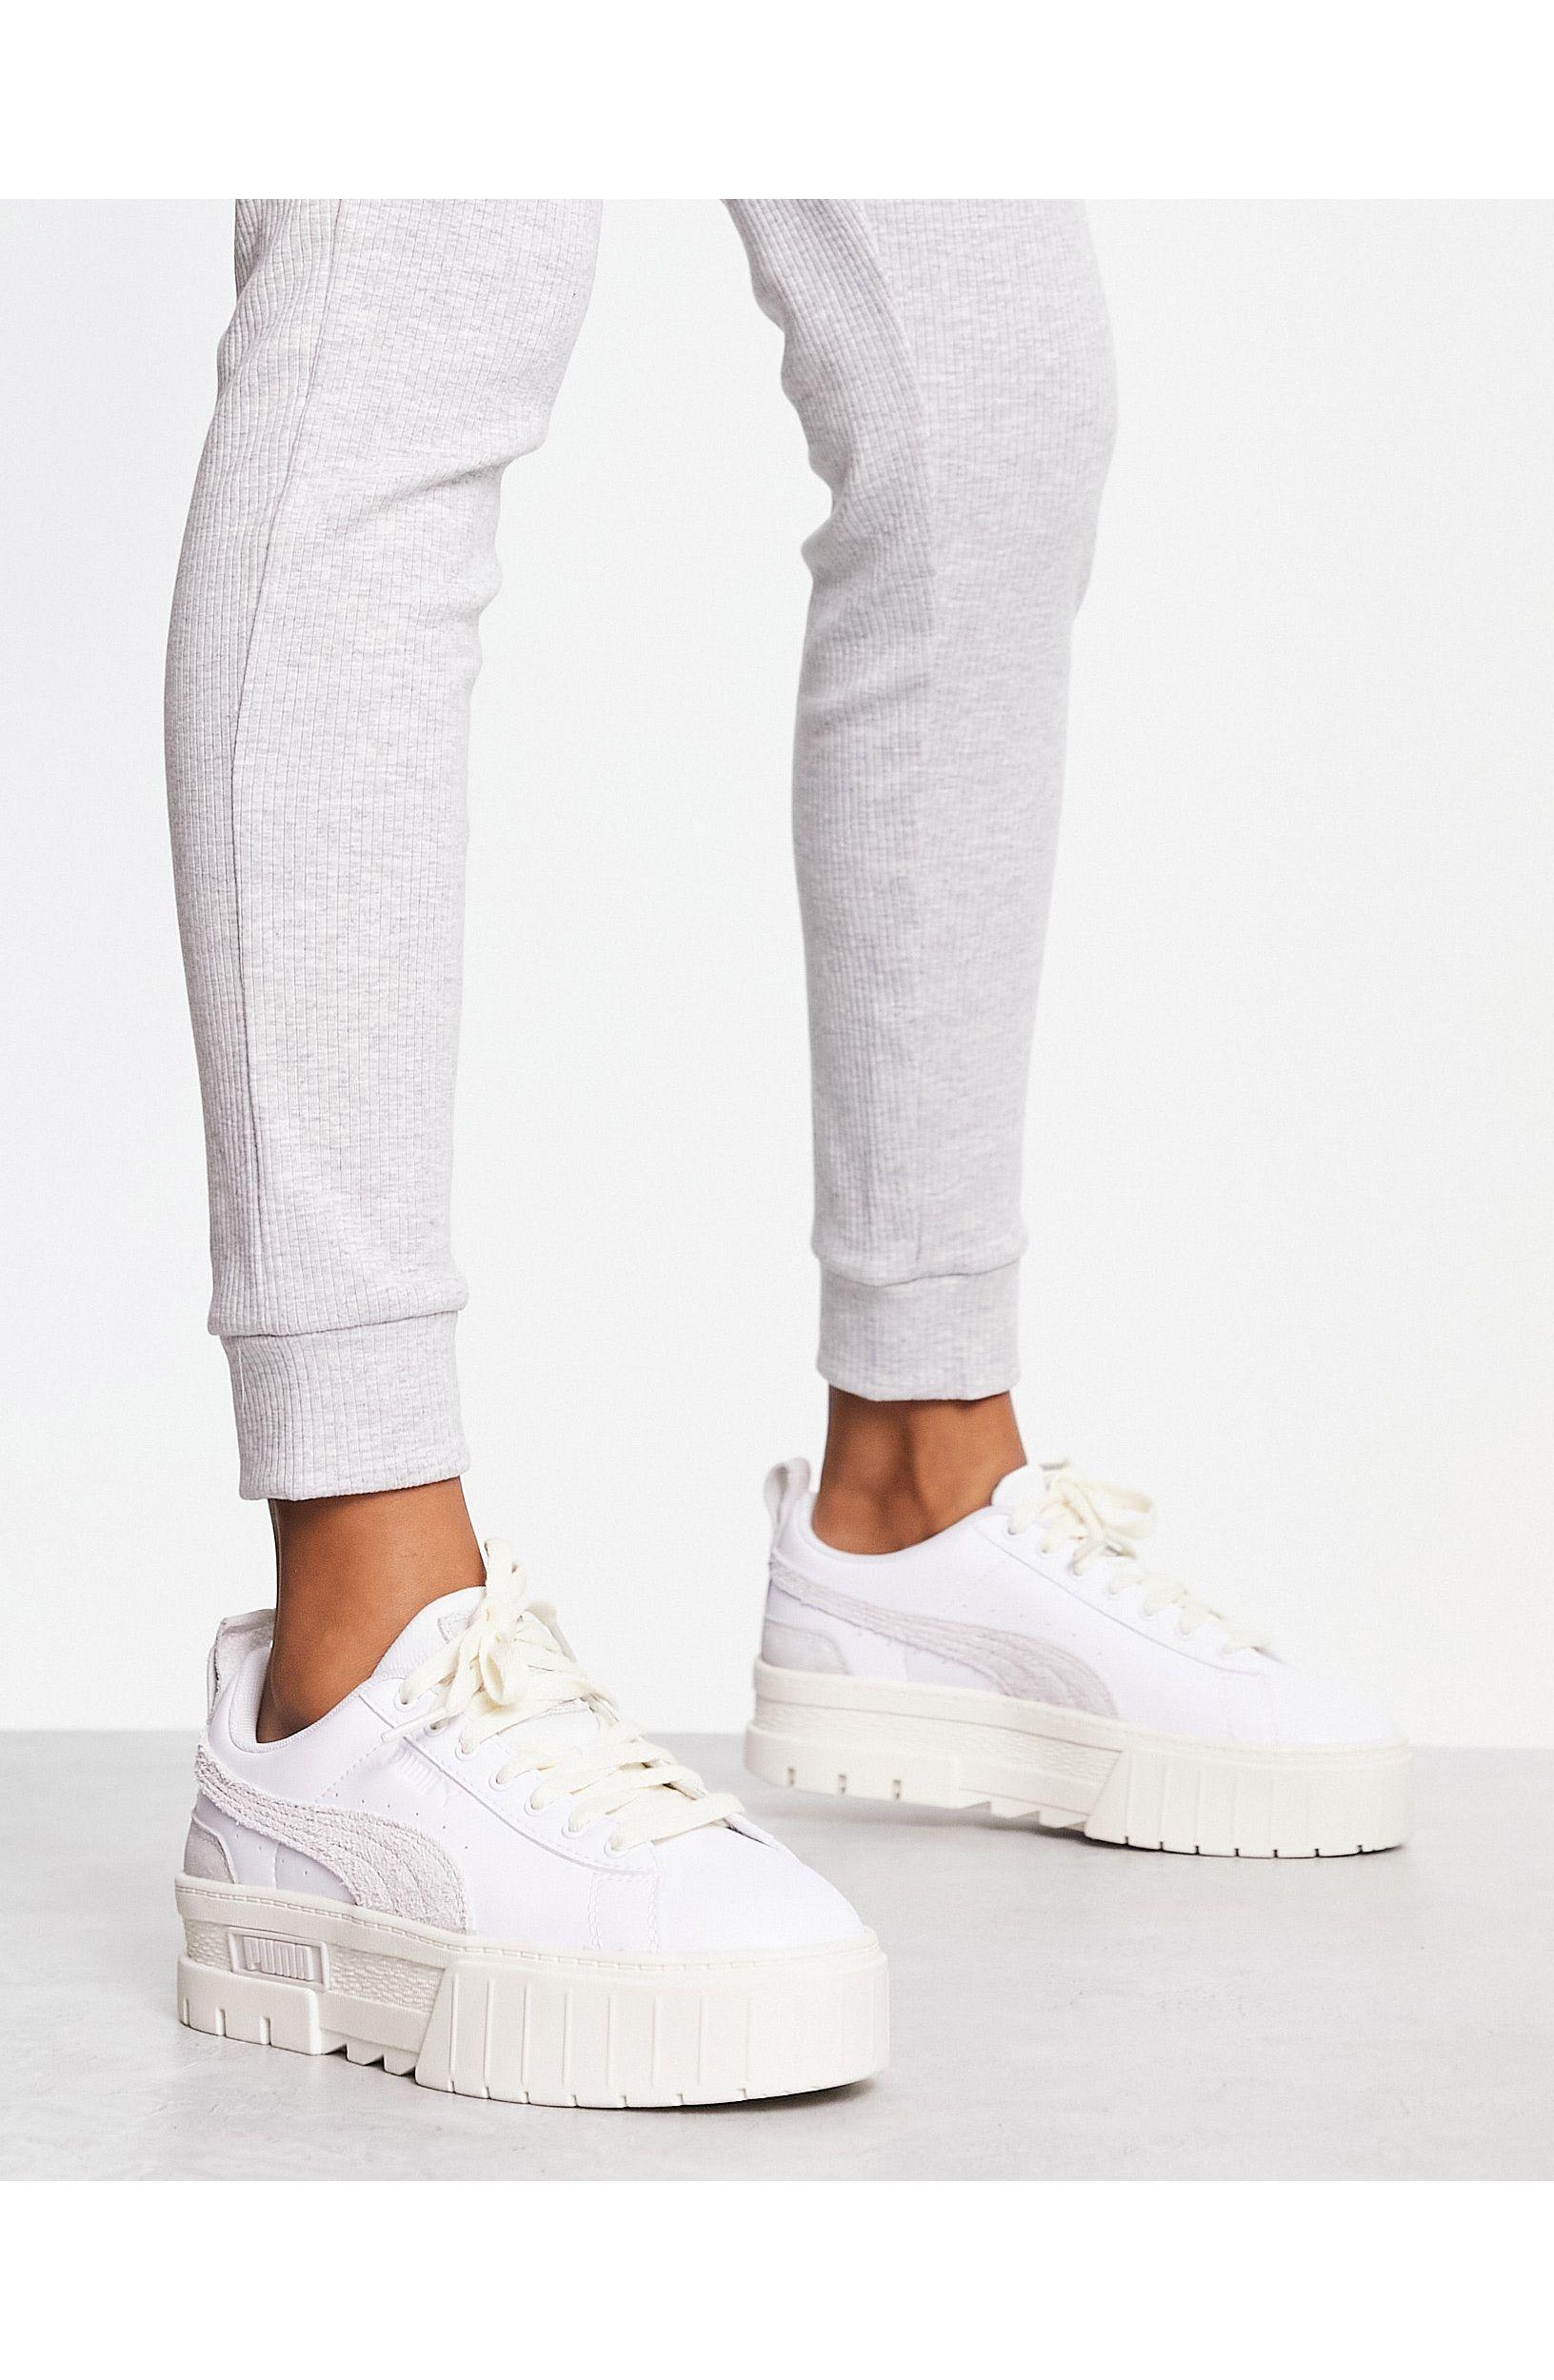 PUMA Mayze Textured Neutral Trainers in White | Lyst